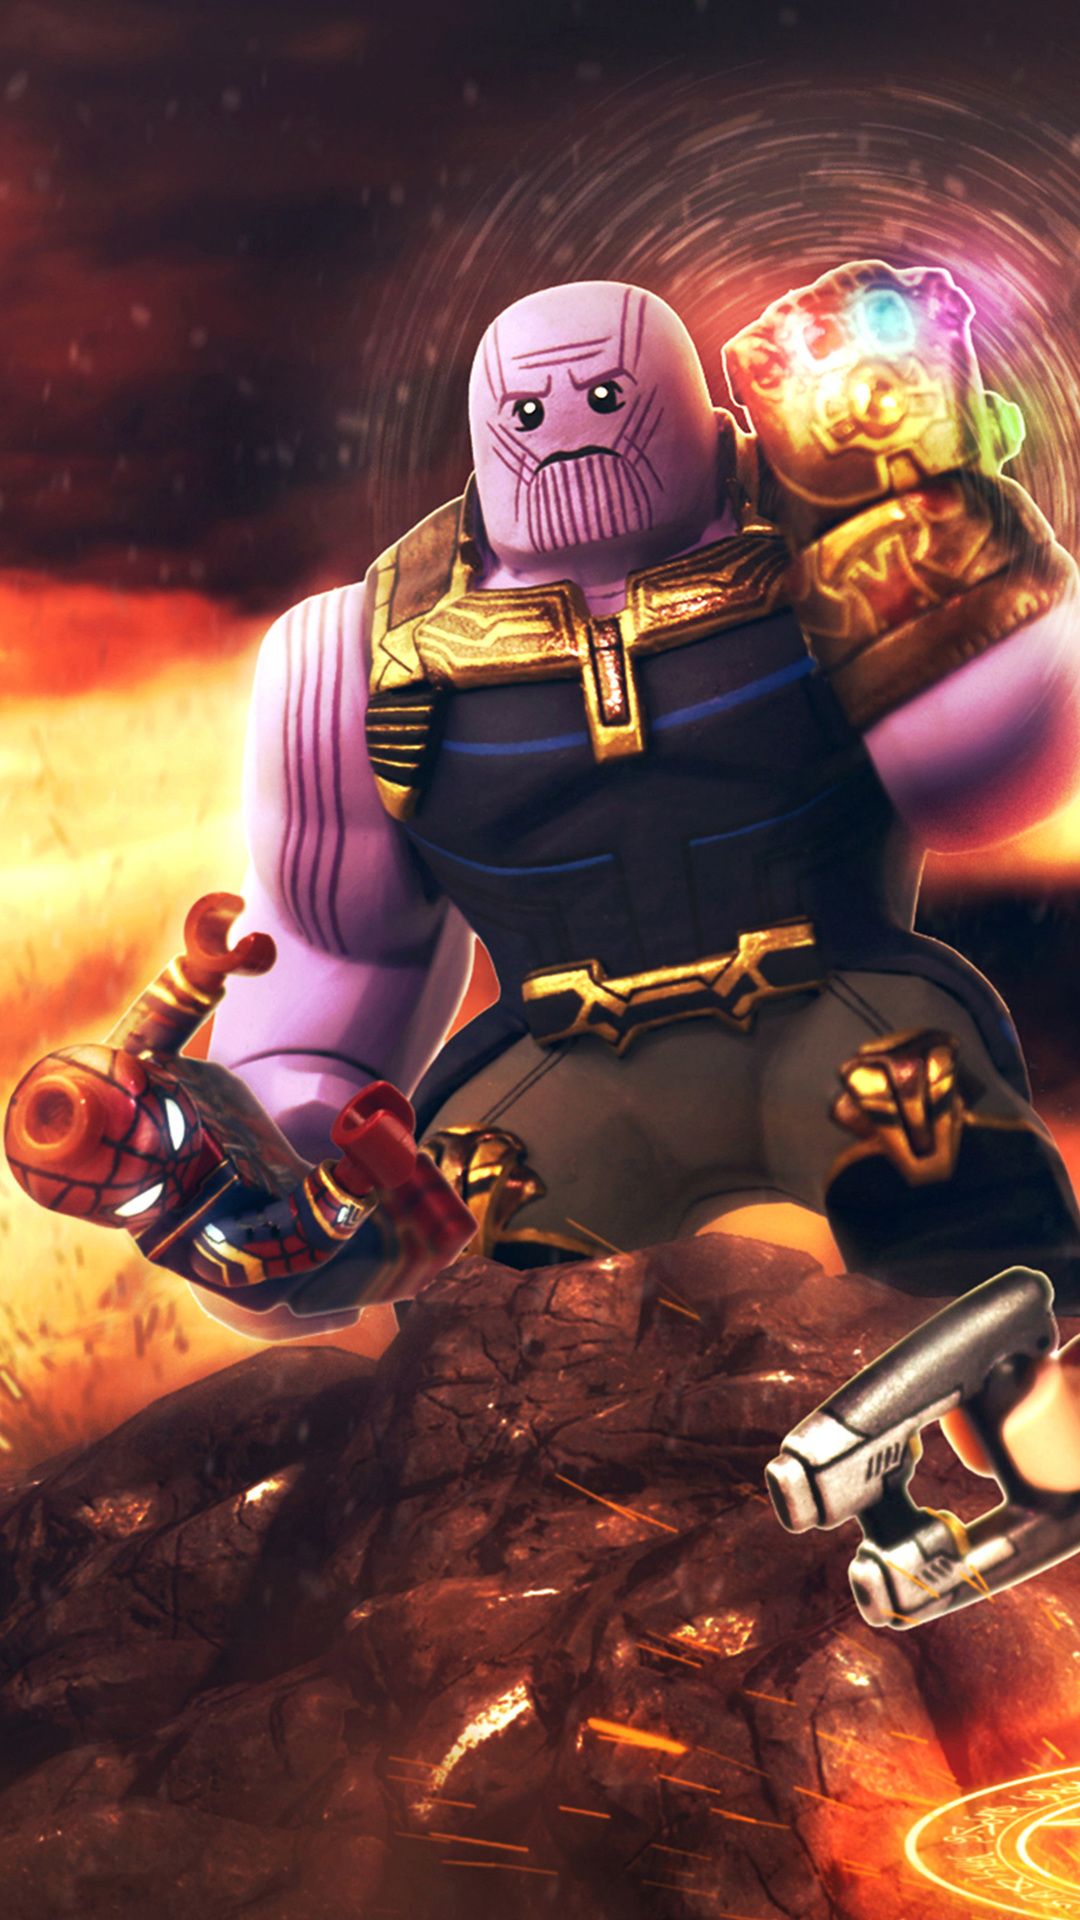 1080x1920 avengers infinity war, movies, 2018 movies, hd, lego for iPhone 8 wallpaper